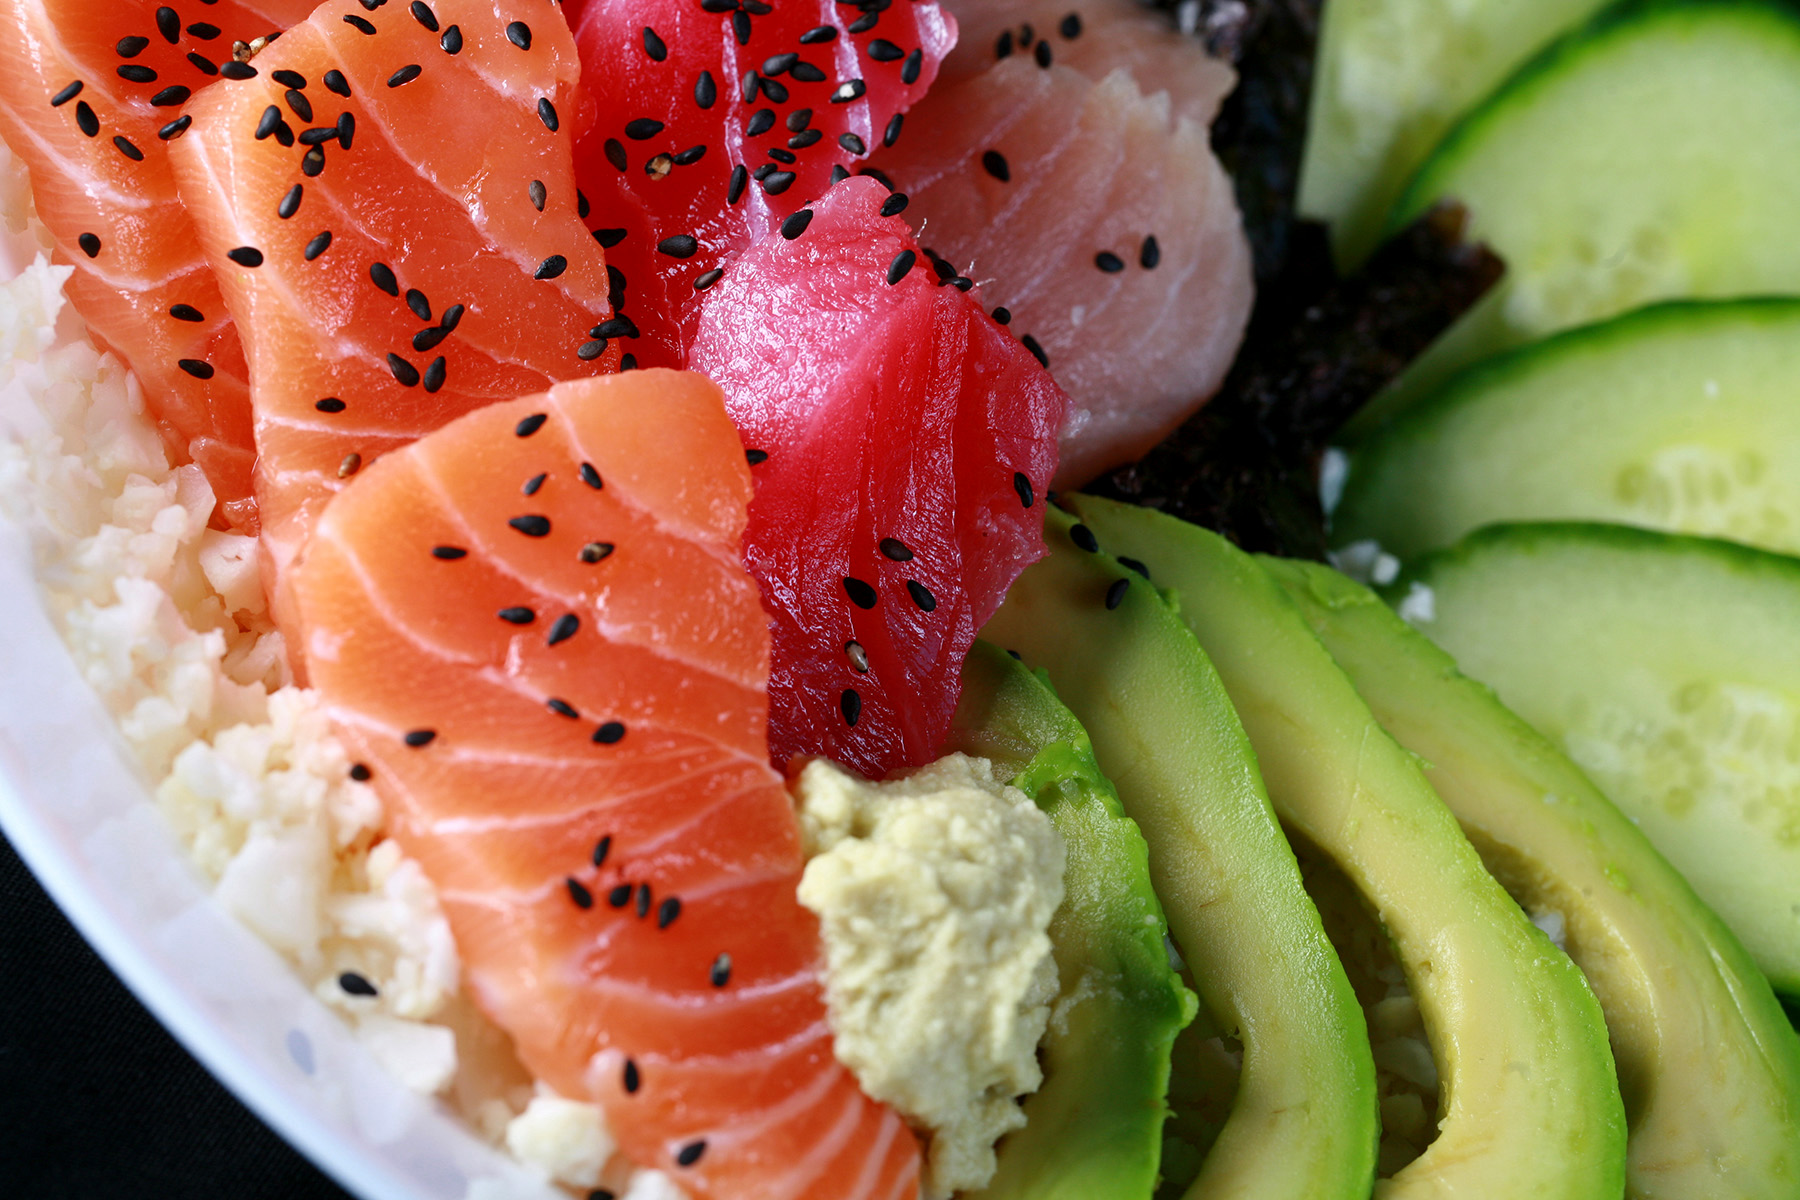 A low carb chirashi bowl - A shallow bowl with various cuts of fish - salmon, tuna, and snapper - as well as some veggies. It is all arranged on top of riced cauliflower.